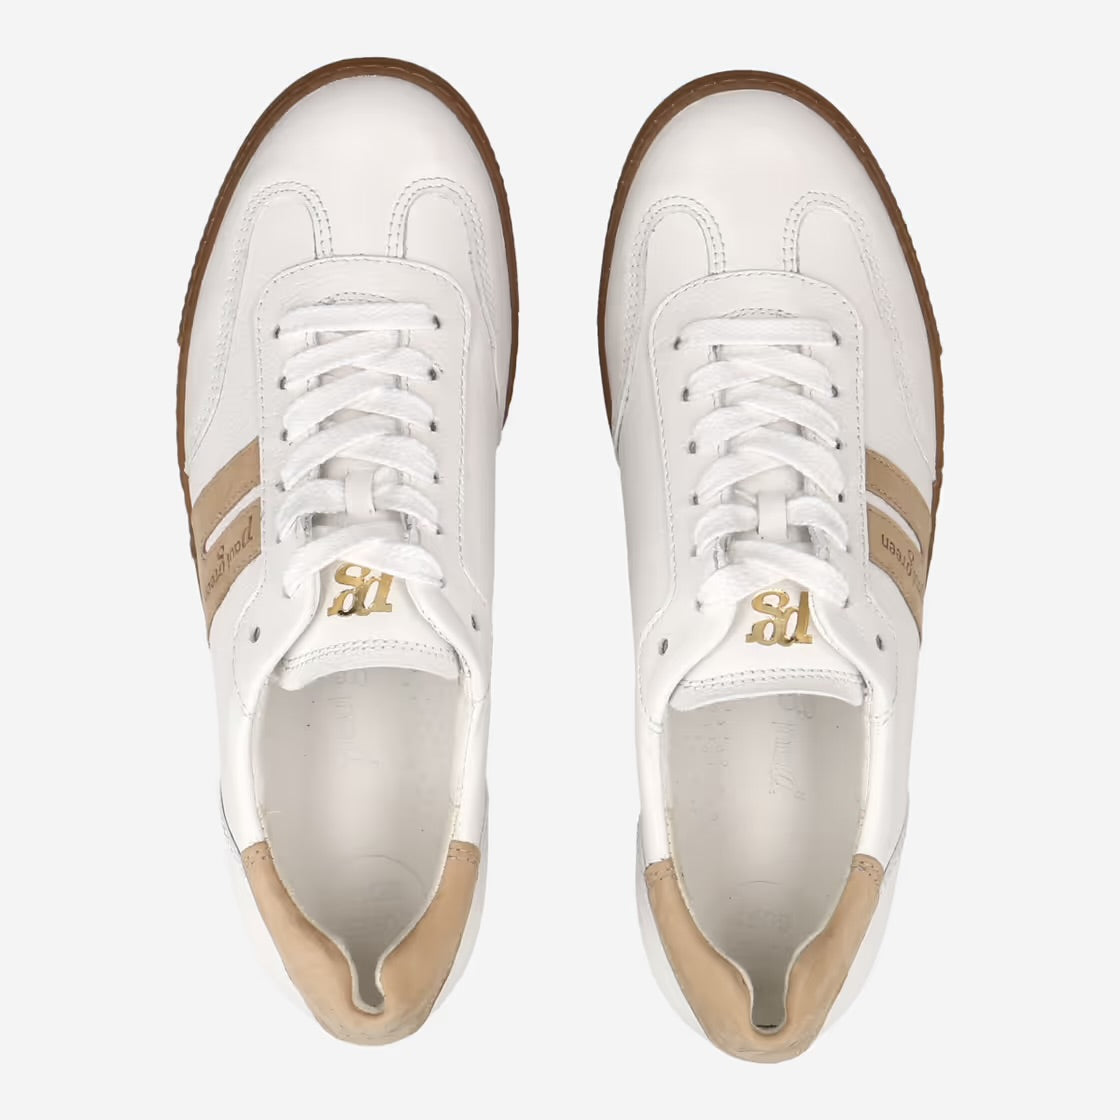 Paul Green - 5350 White and Beige Trainer [Standard Fit]